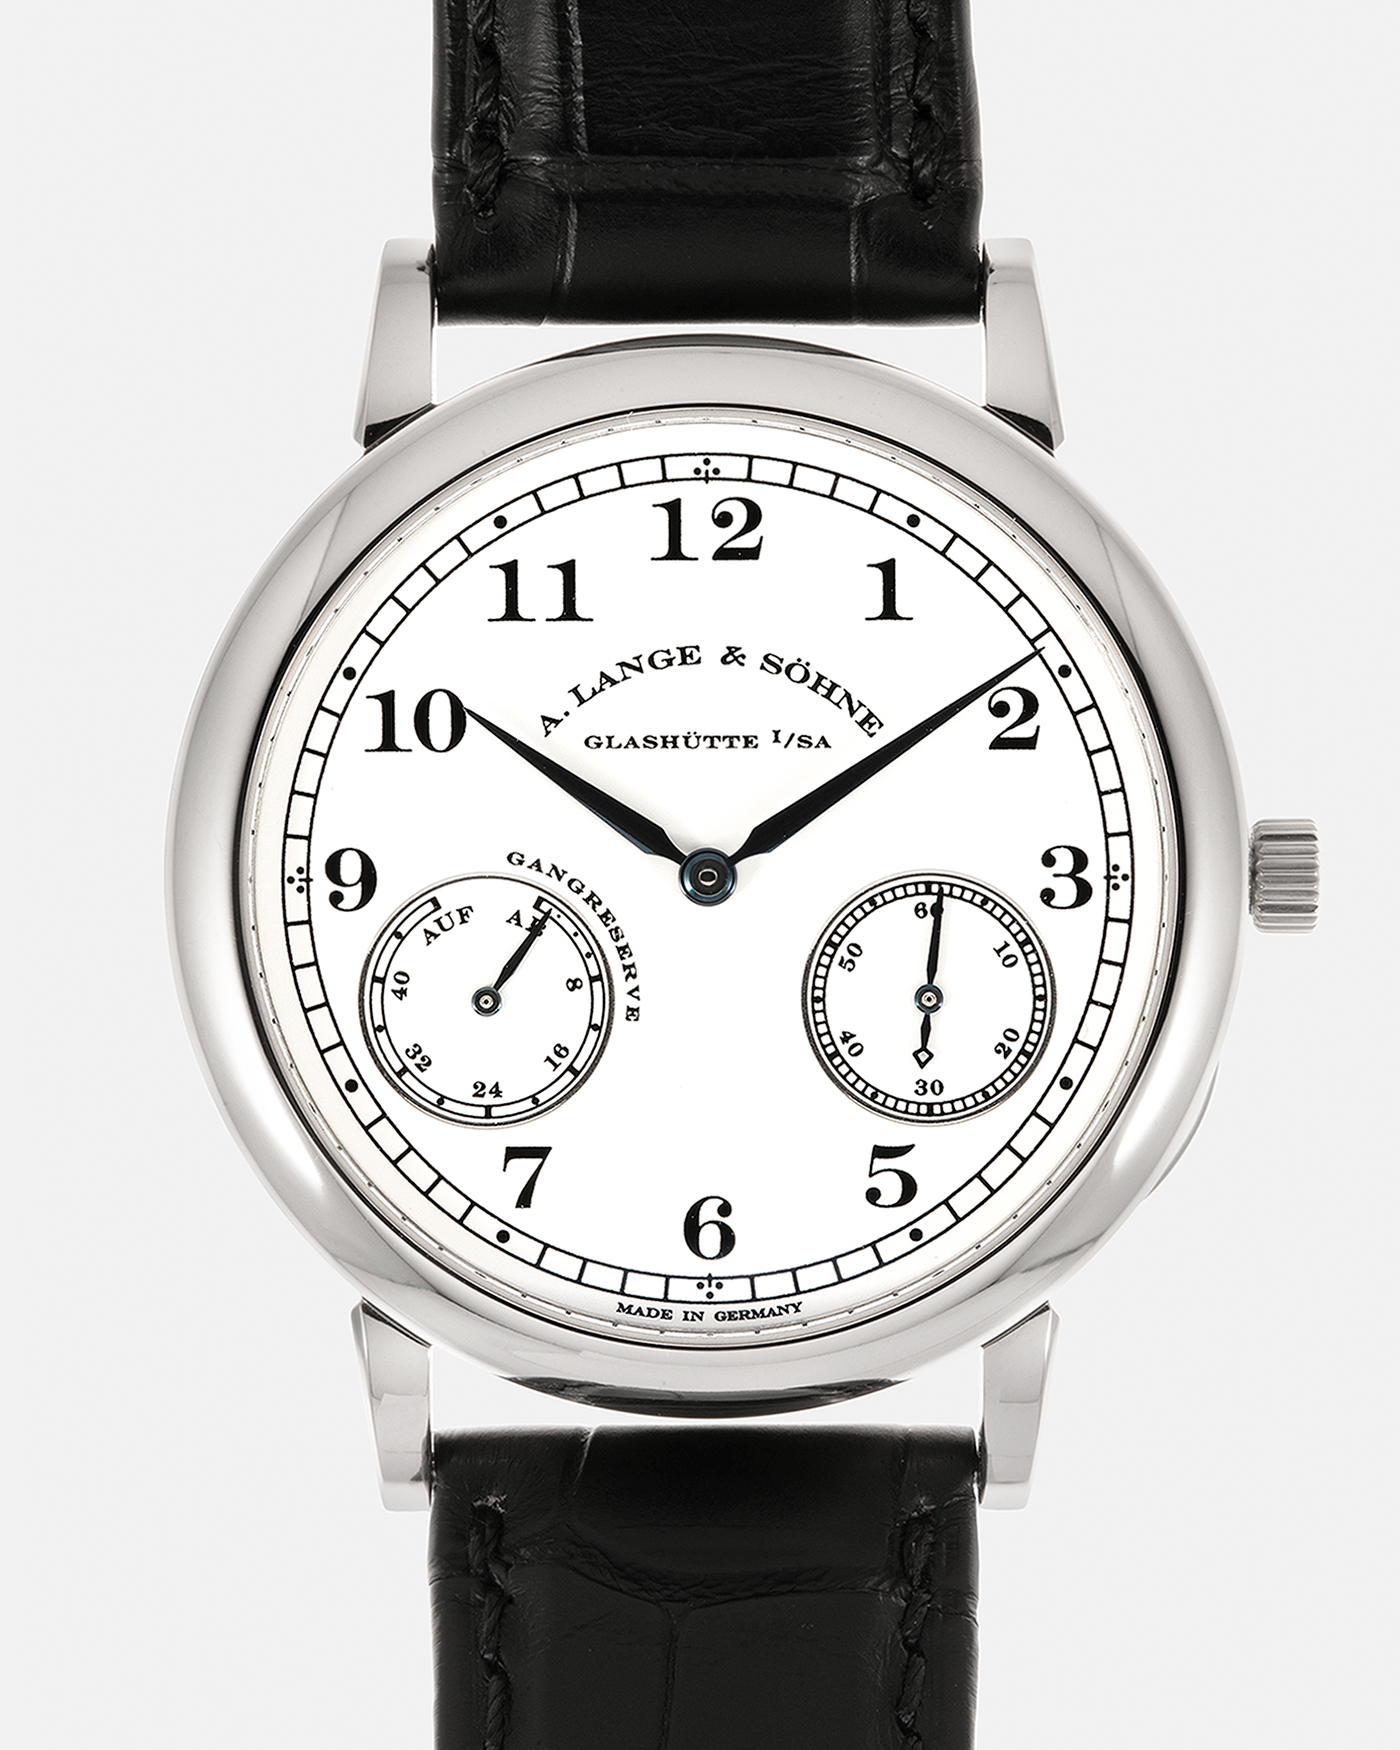 Year: 2009 Model: 1815 Up & Down ‘Walter Lange’, Limited to 50 Pieces in White Gold Reference Number: 223.026 Material: 18-carat White Gold Movement: Cal. L942.1, Manual-Winding Case Dimensions: 37.5mm x 9mm Lug Width: 19mm Strap: A. Lange & Söhne Black Alligator Strap with Signed Platinum Tang Buckle